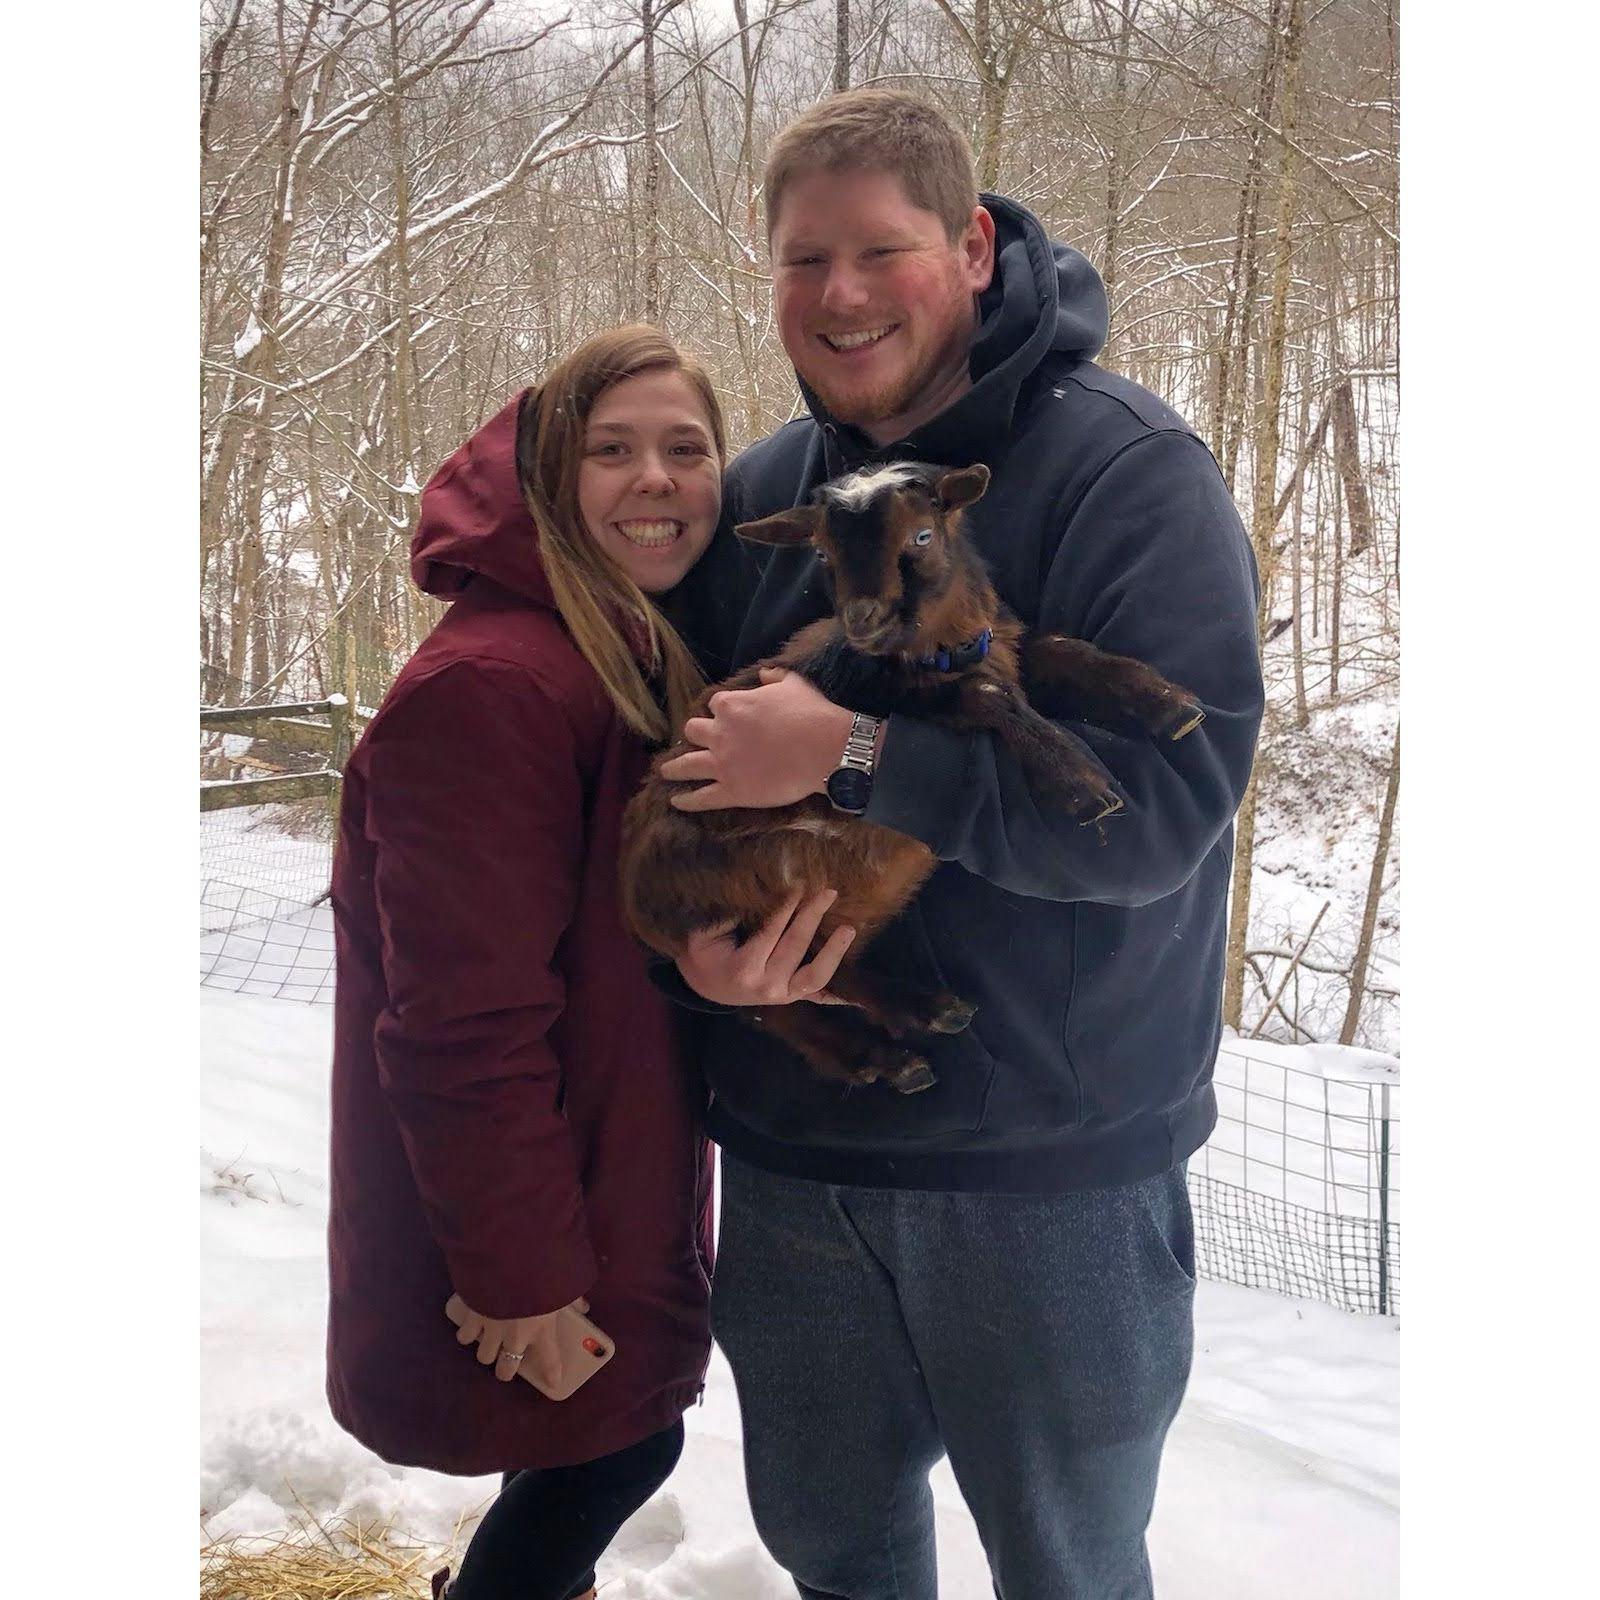 Our weekend adventure with Marvin the goat in West Virginia!